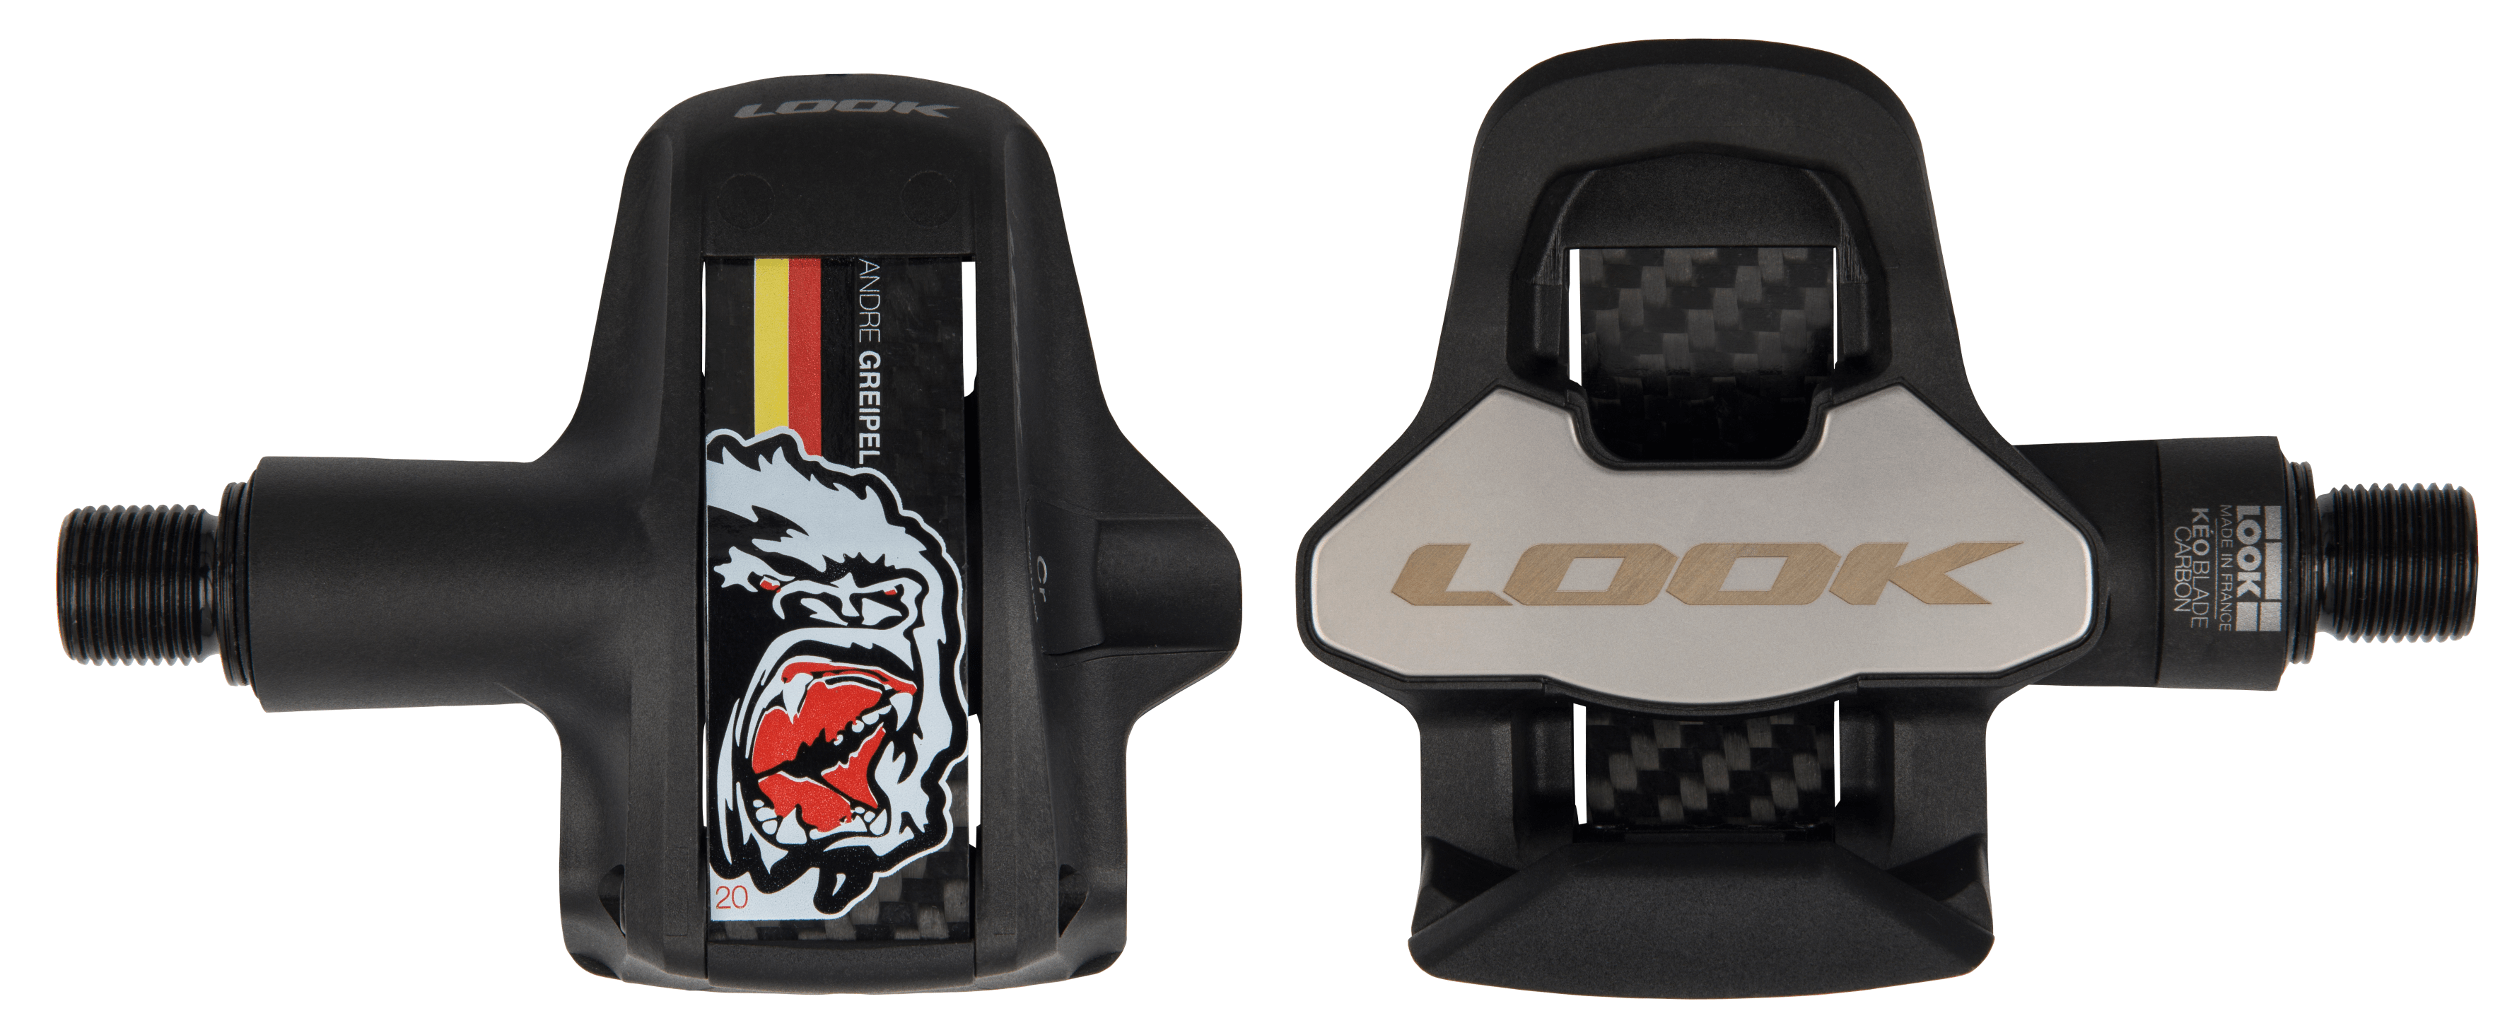 LOOK KÉO BLADE CARBON PEDALS Reviewed